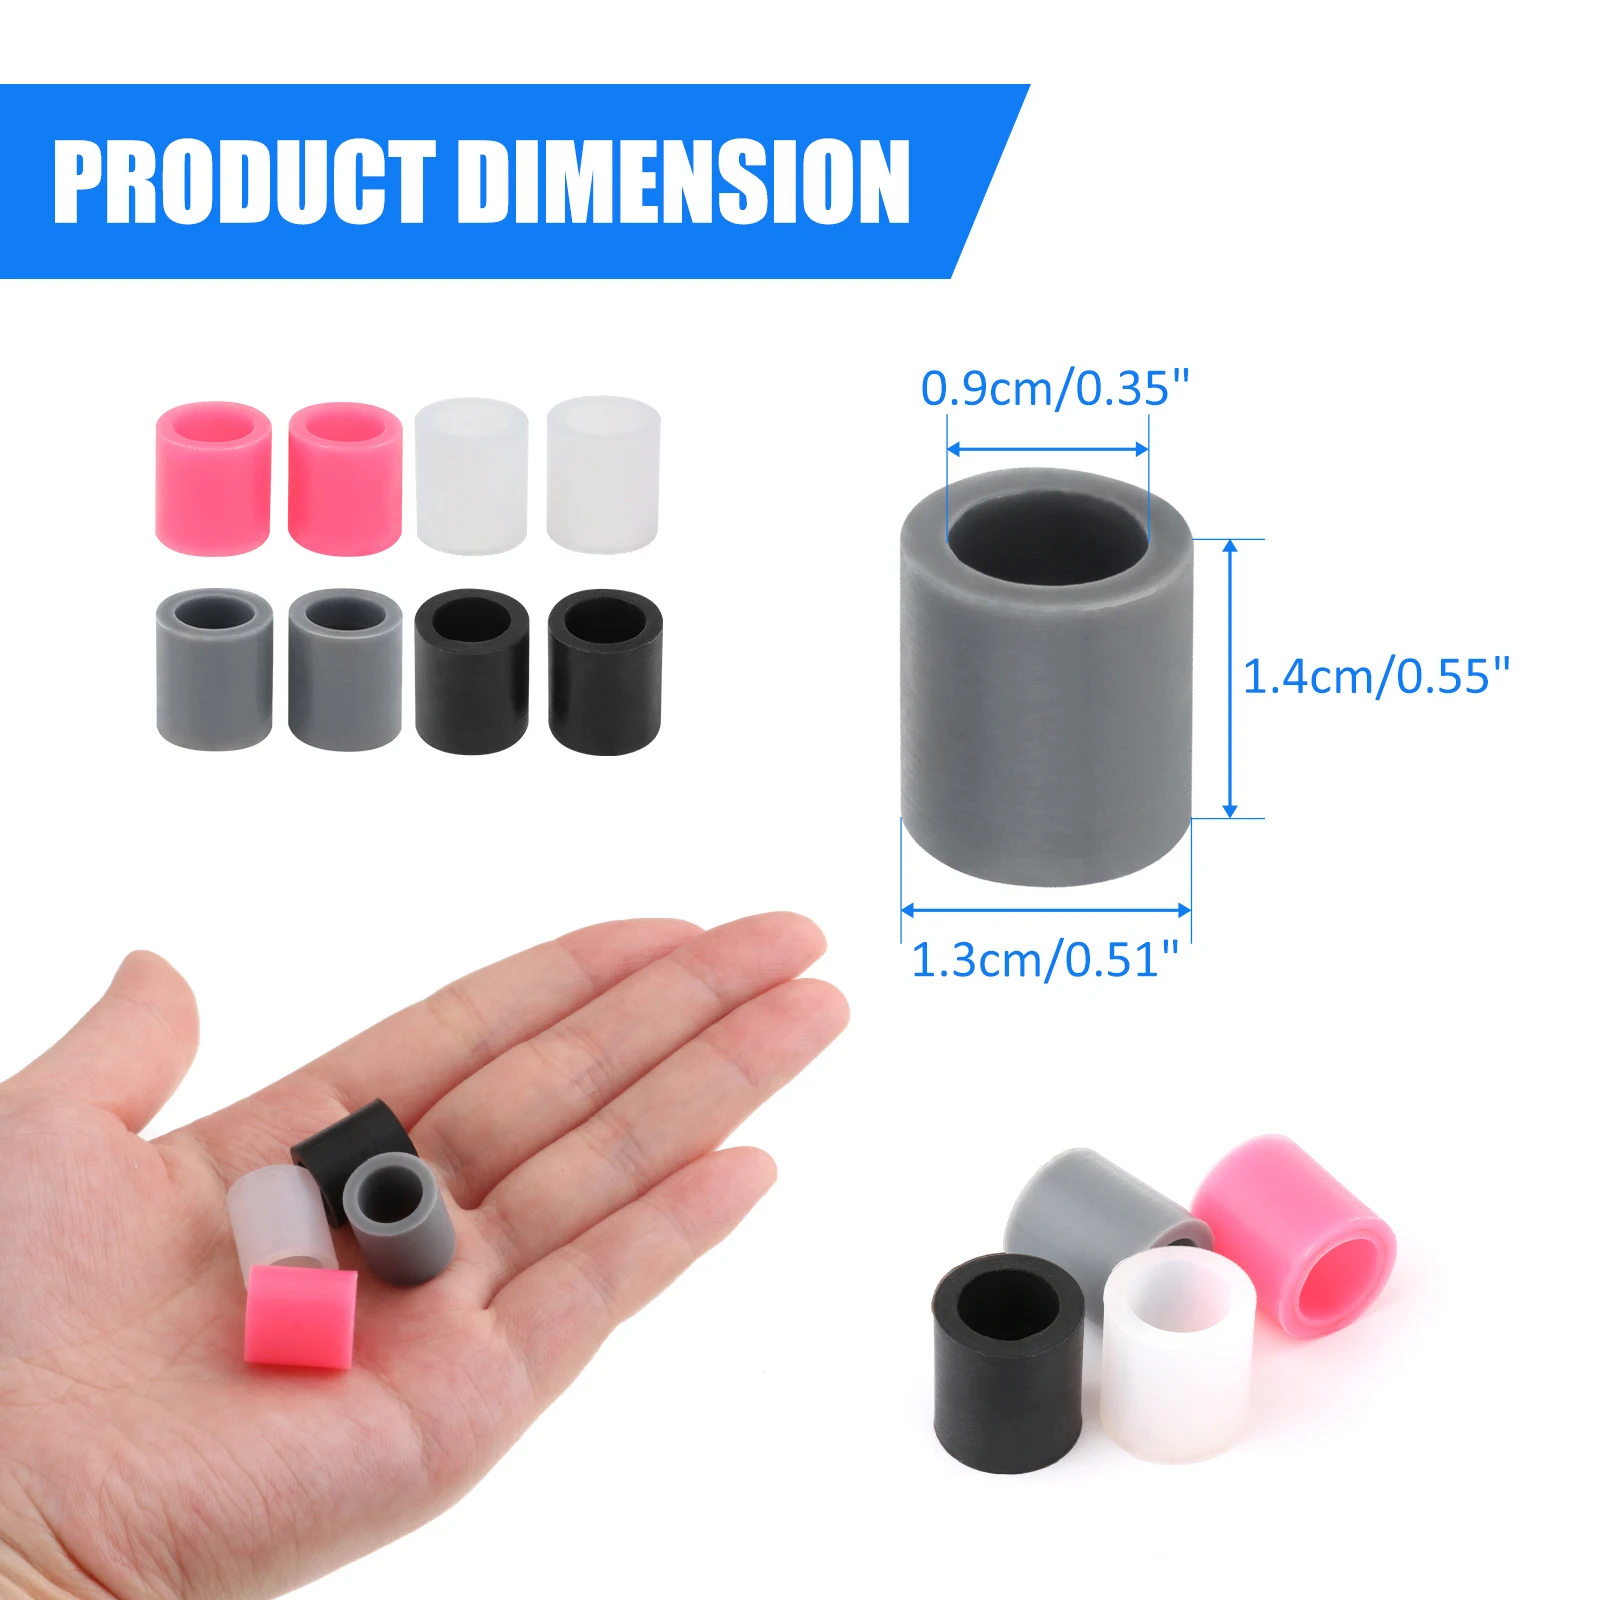 4x Replacement for Cricut Machine Rubber Rollers Replacement Parts Accs